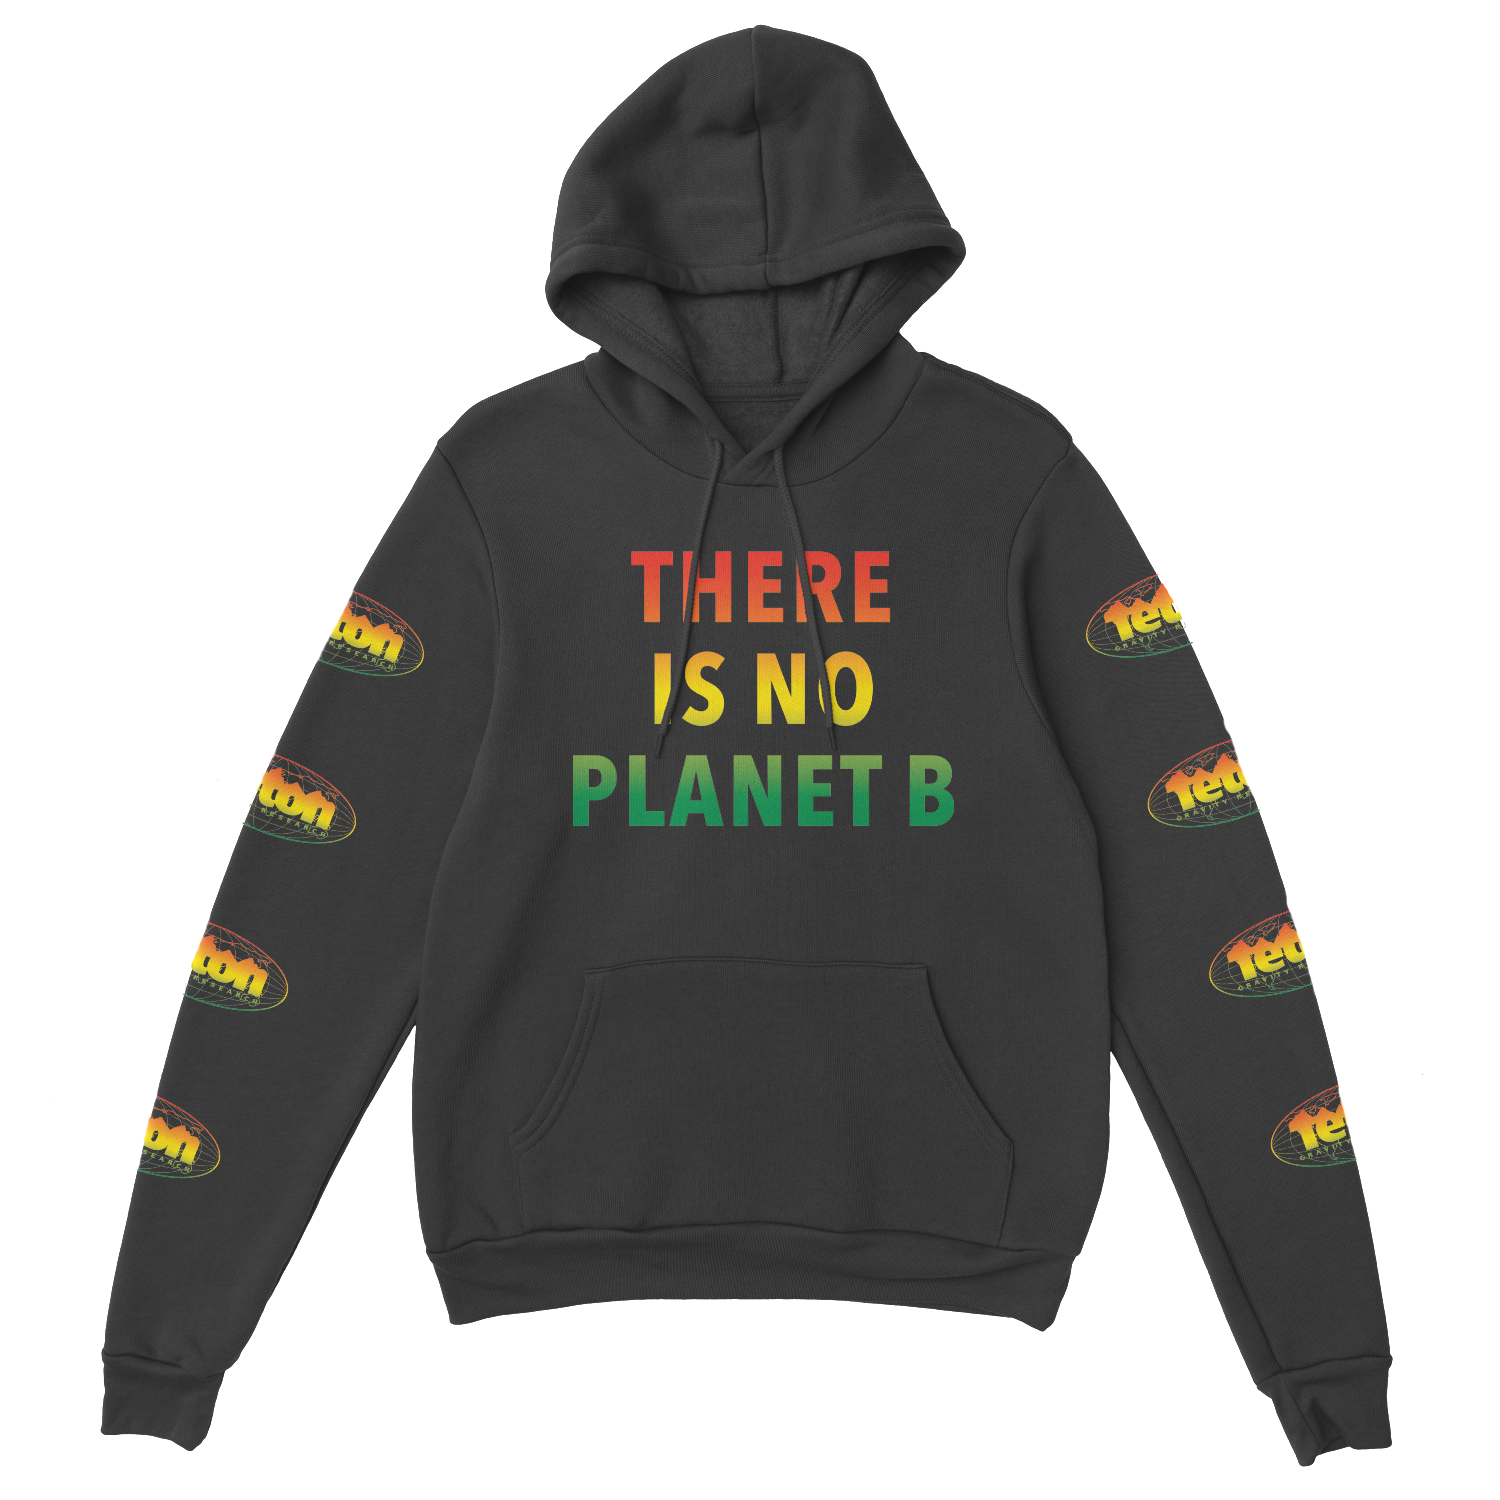 "There Is No Planet B" Pullover Hoodie